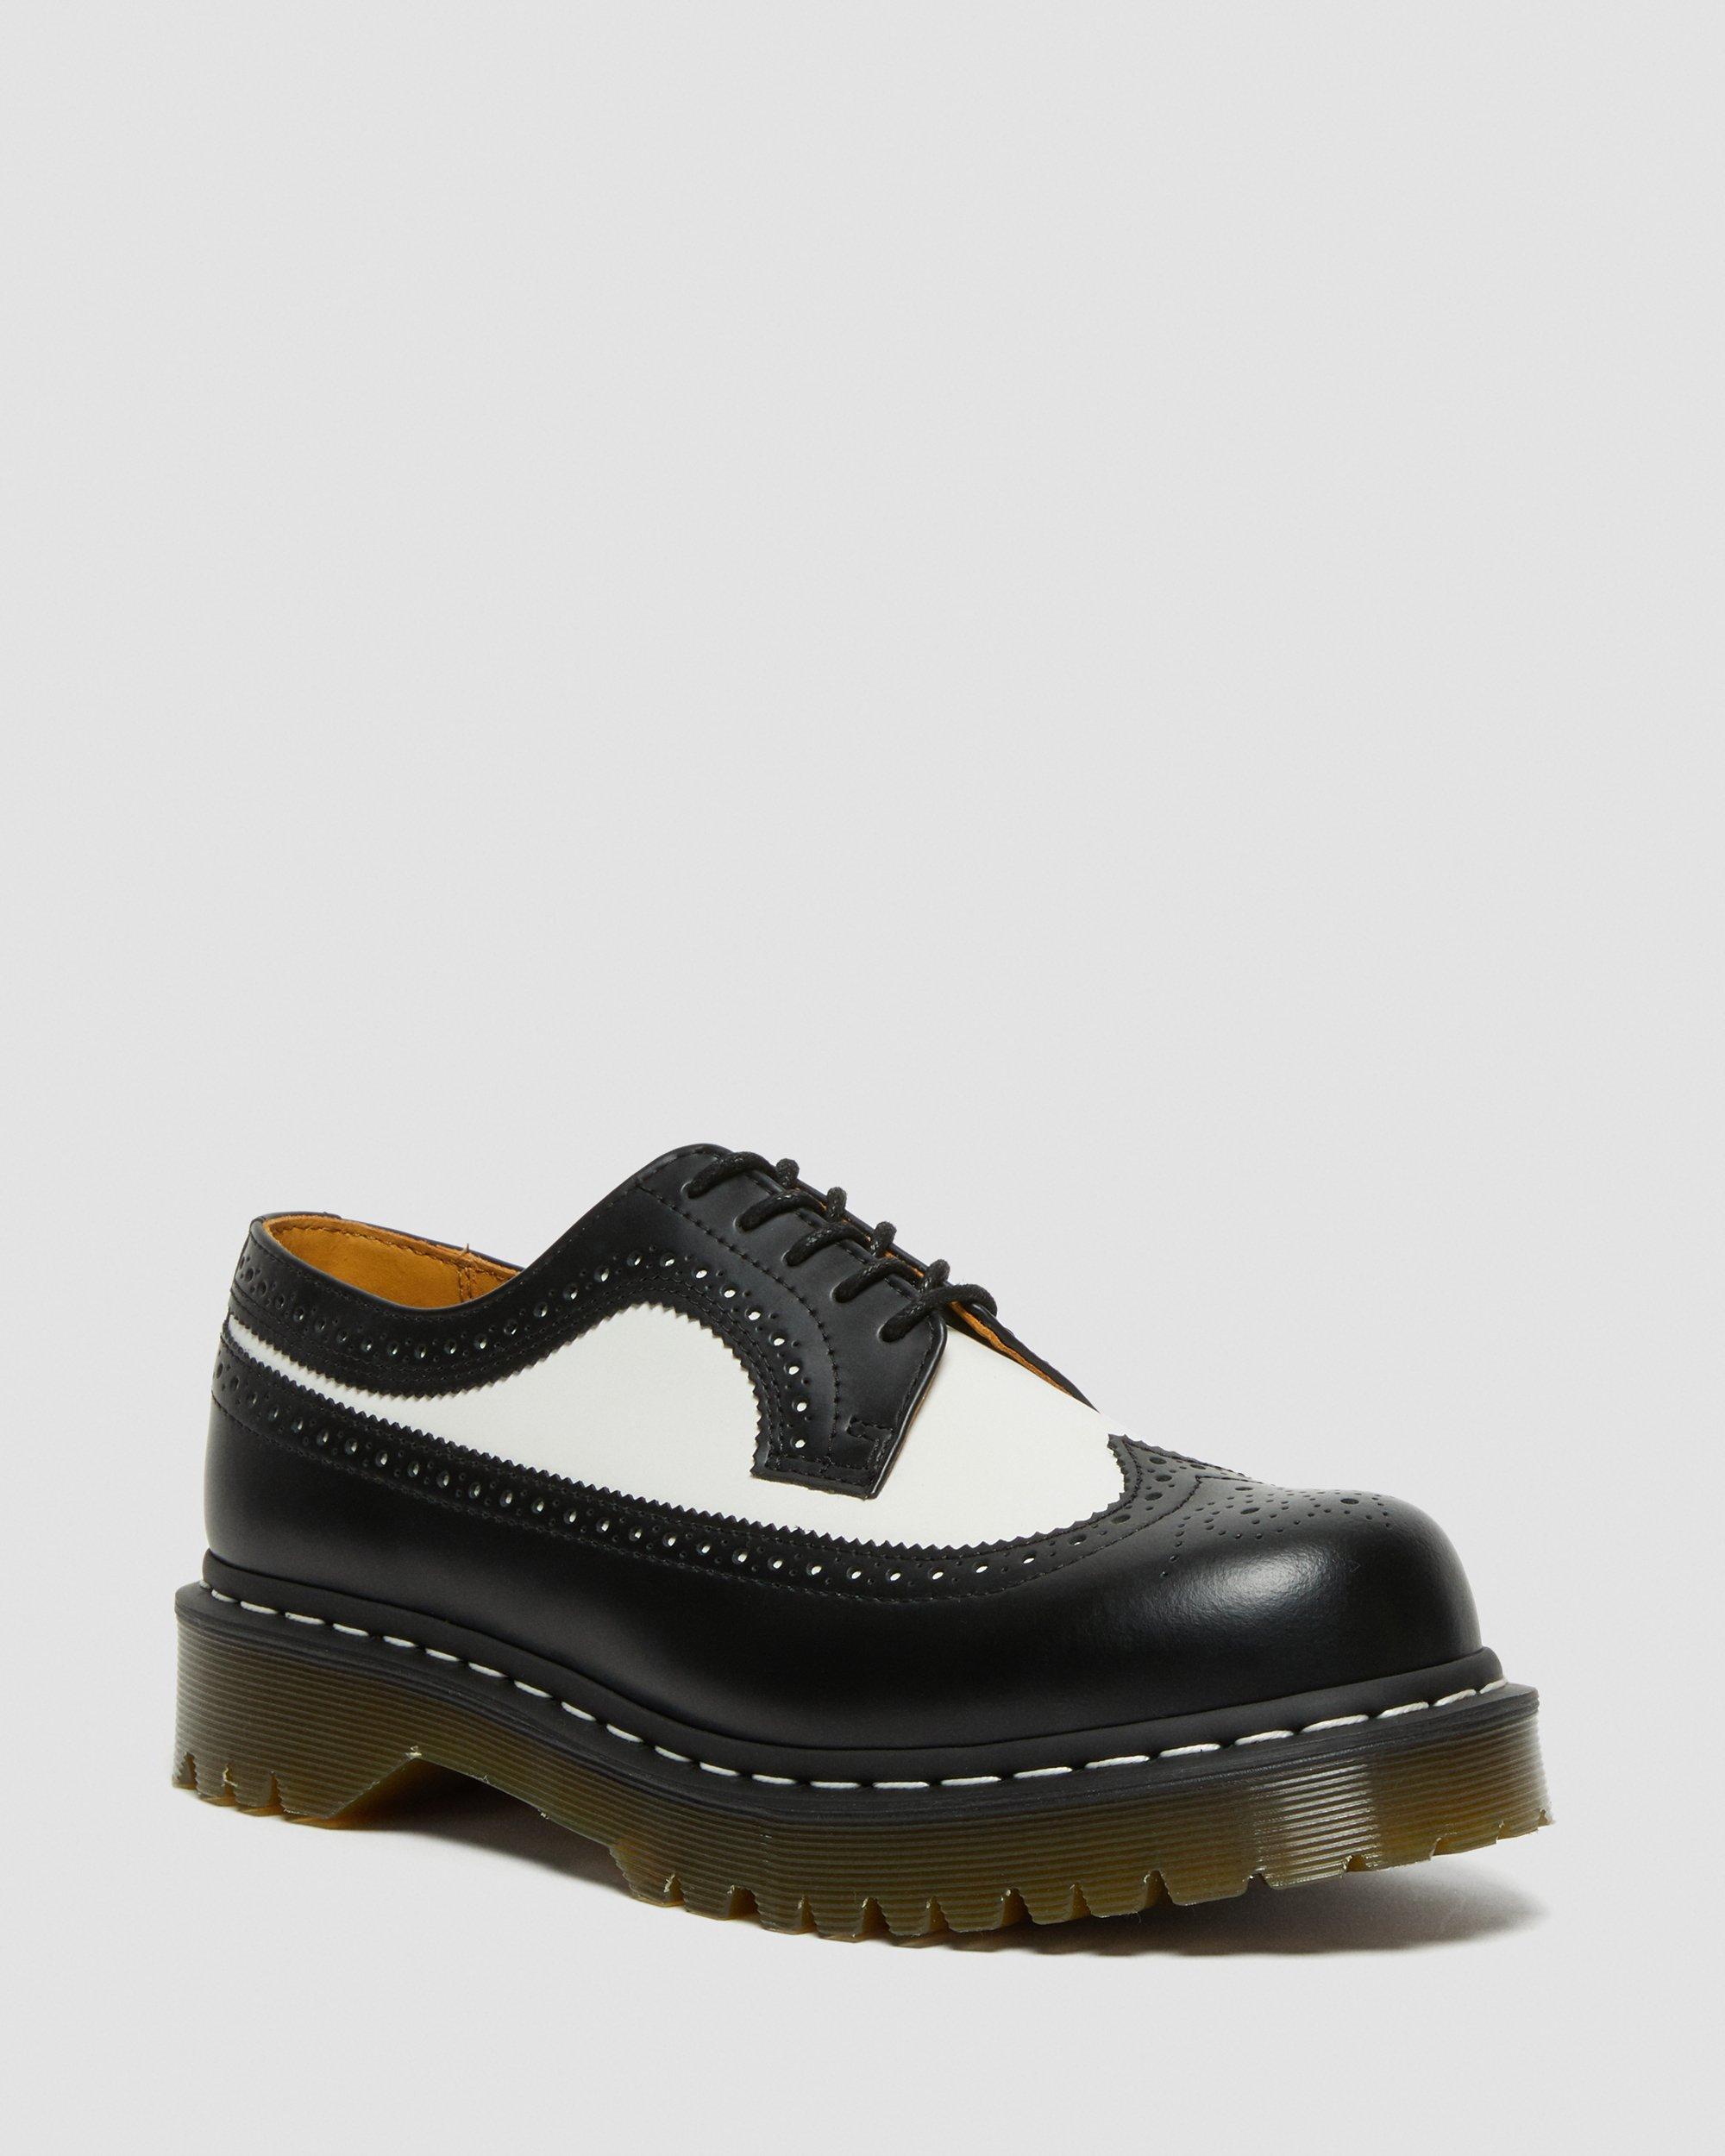 3989 Bex Smooth Leather Brogue Shoes | Dr. Martens